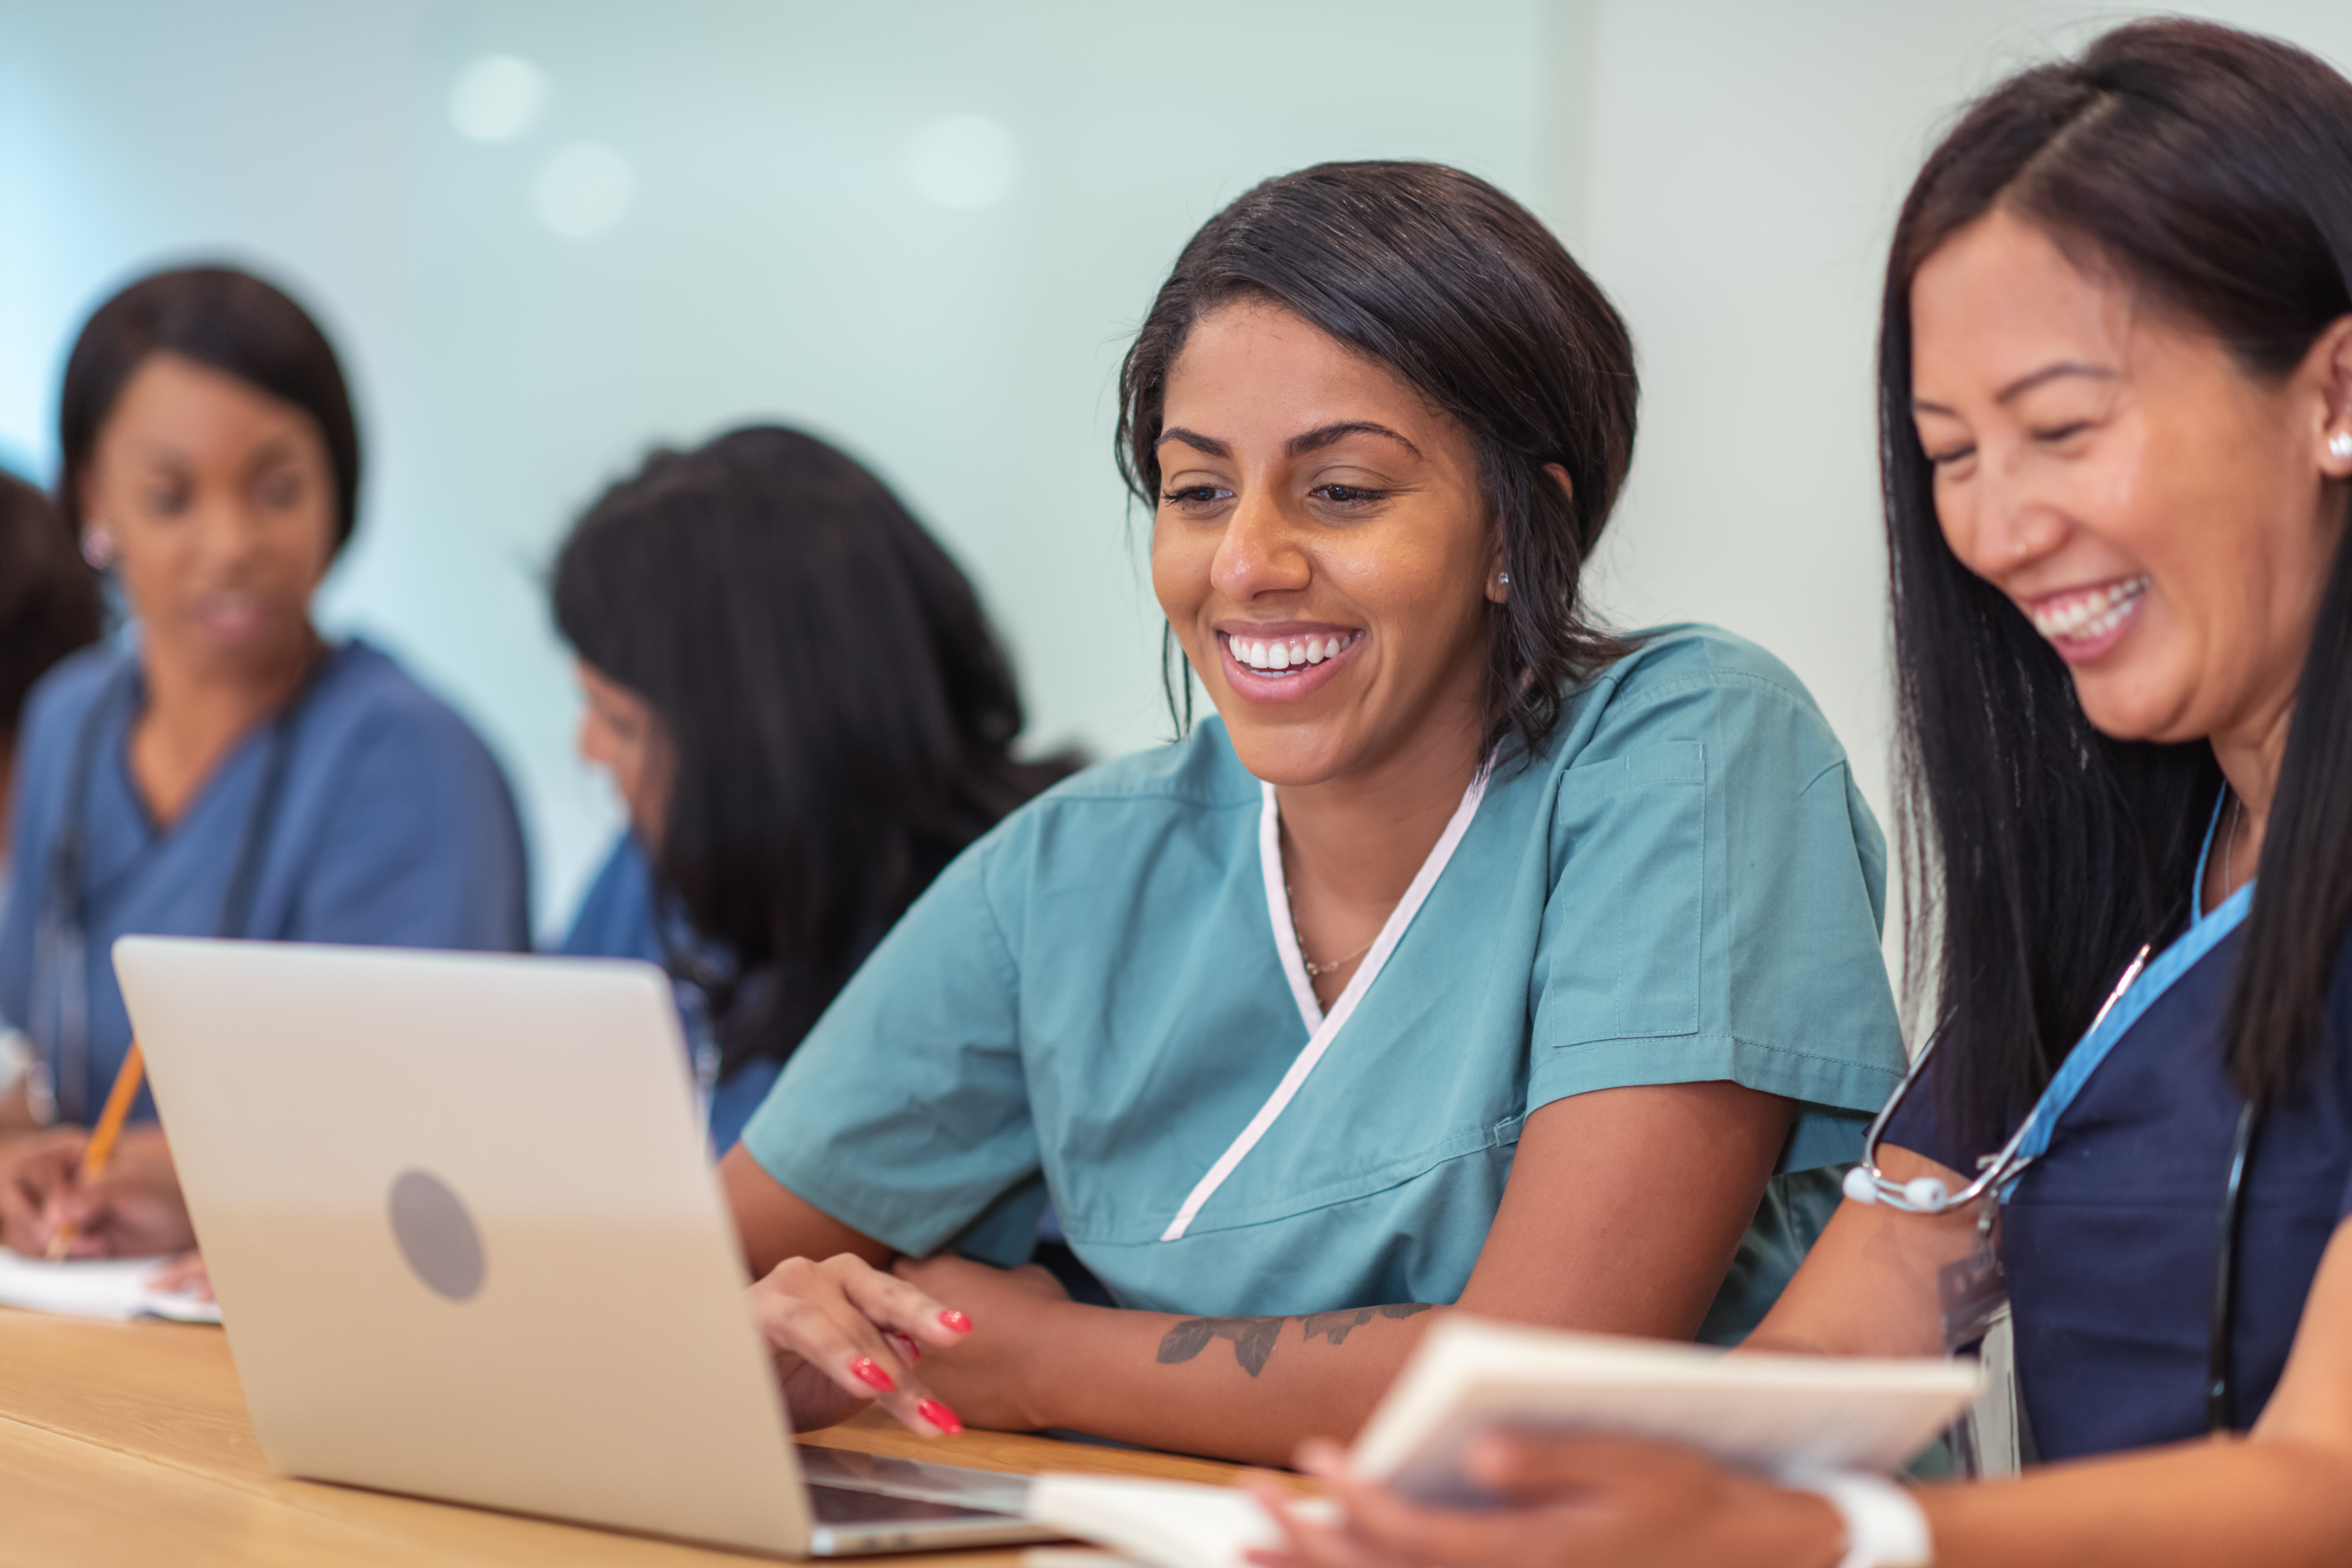 Female nurse smiling sitting at desk looking at laptop computer with other nursing students. Ultimate guide to Nursing Careers